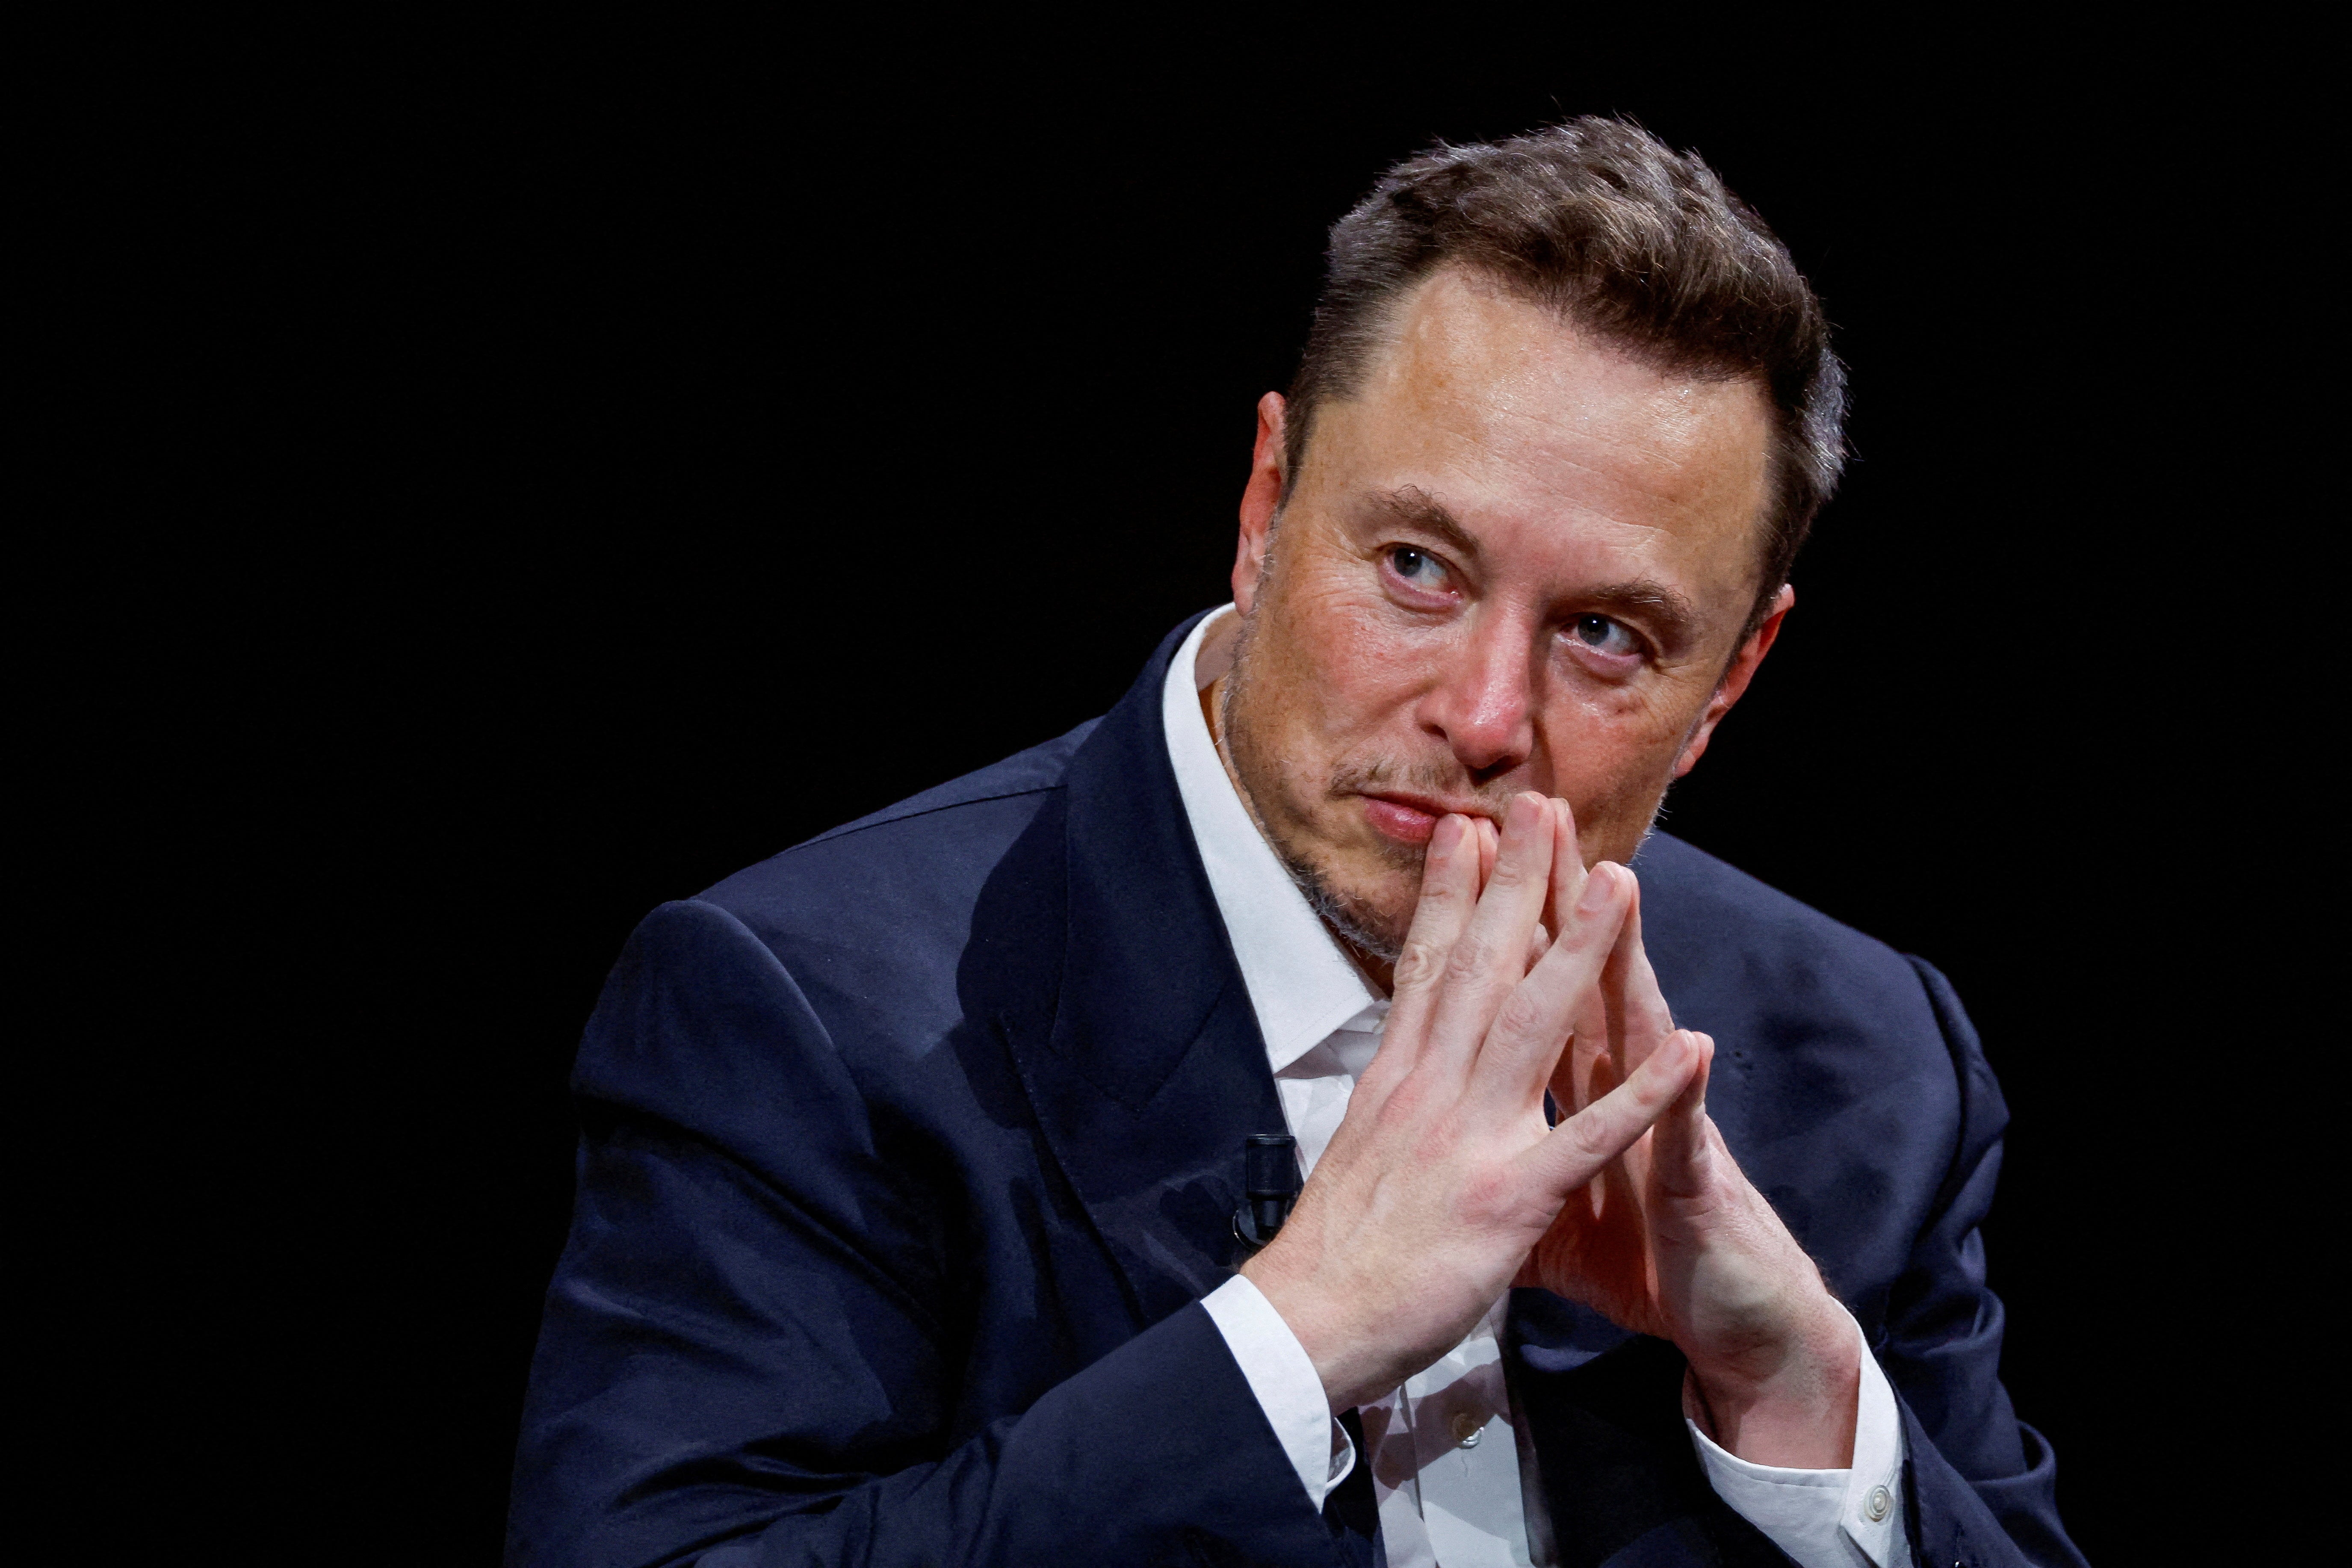 Elon Musk, owner of X, says “free speech is the bedrock of a functioning democracy”